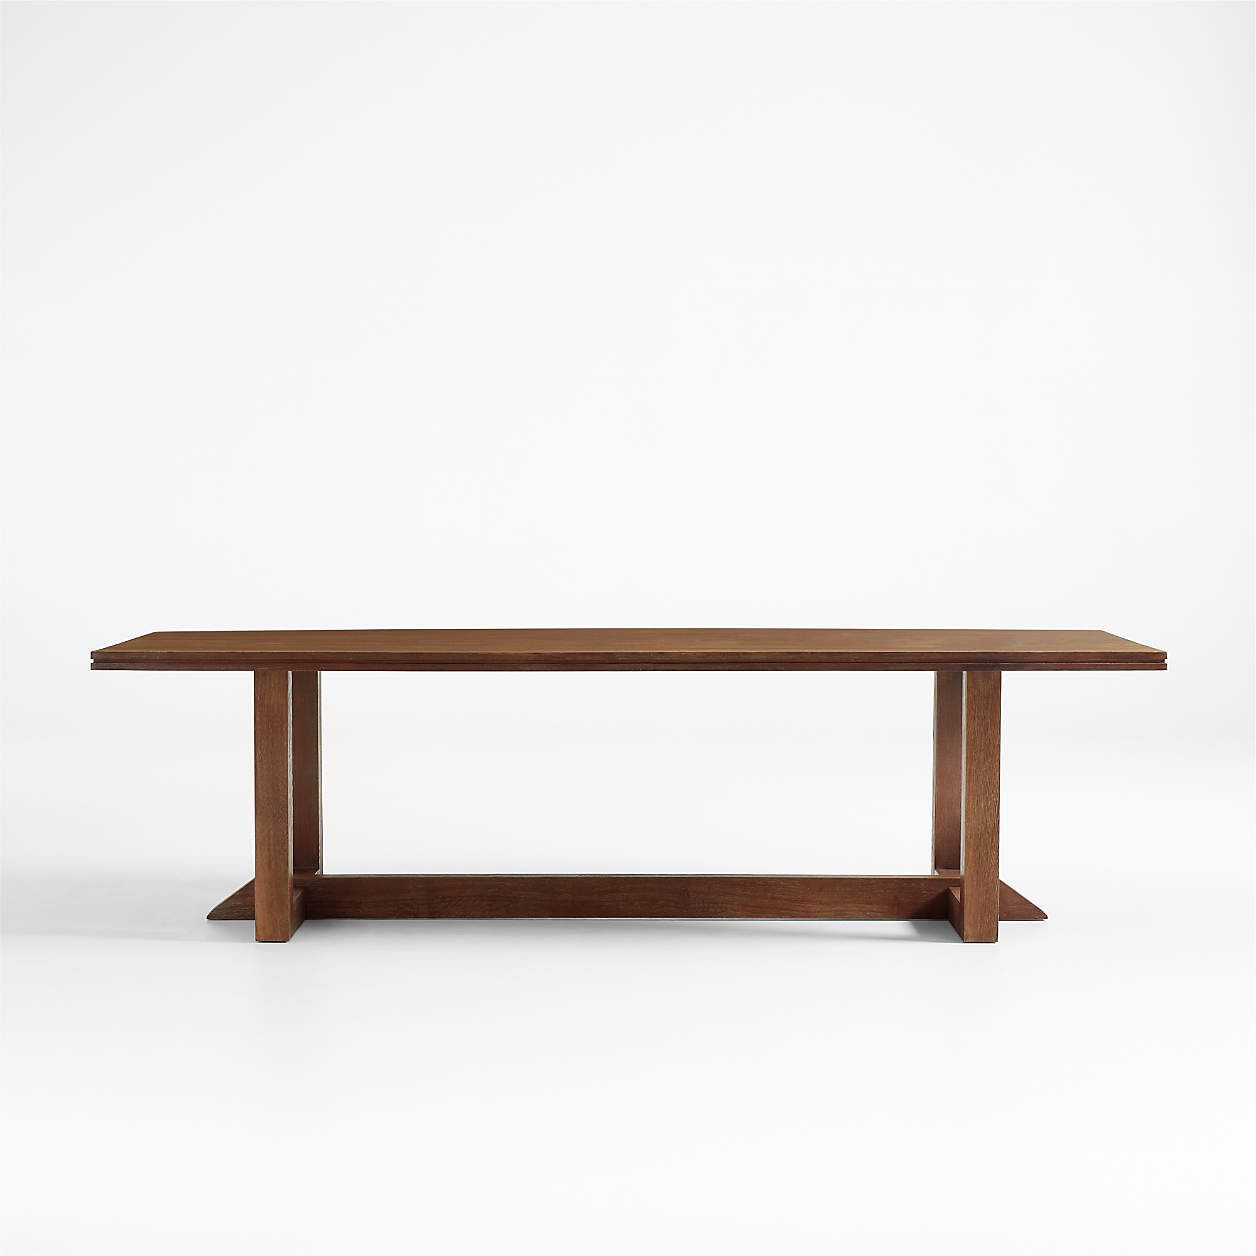 Es Taller 108" White Oak Wood Dining Table